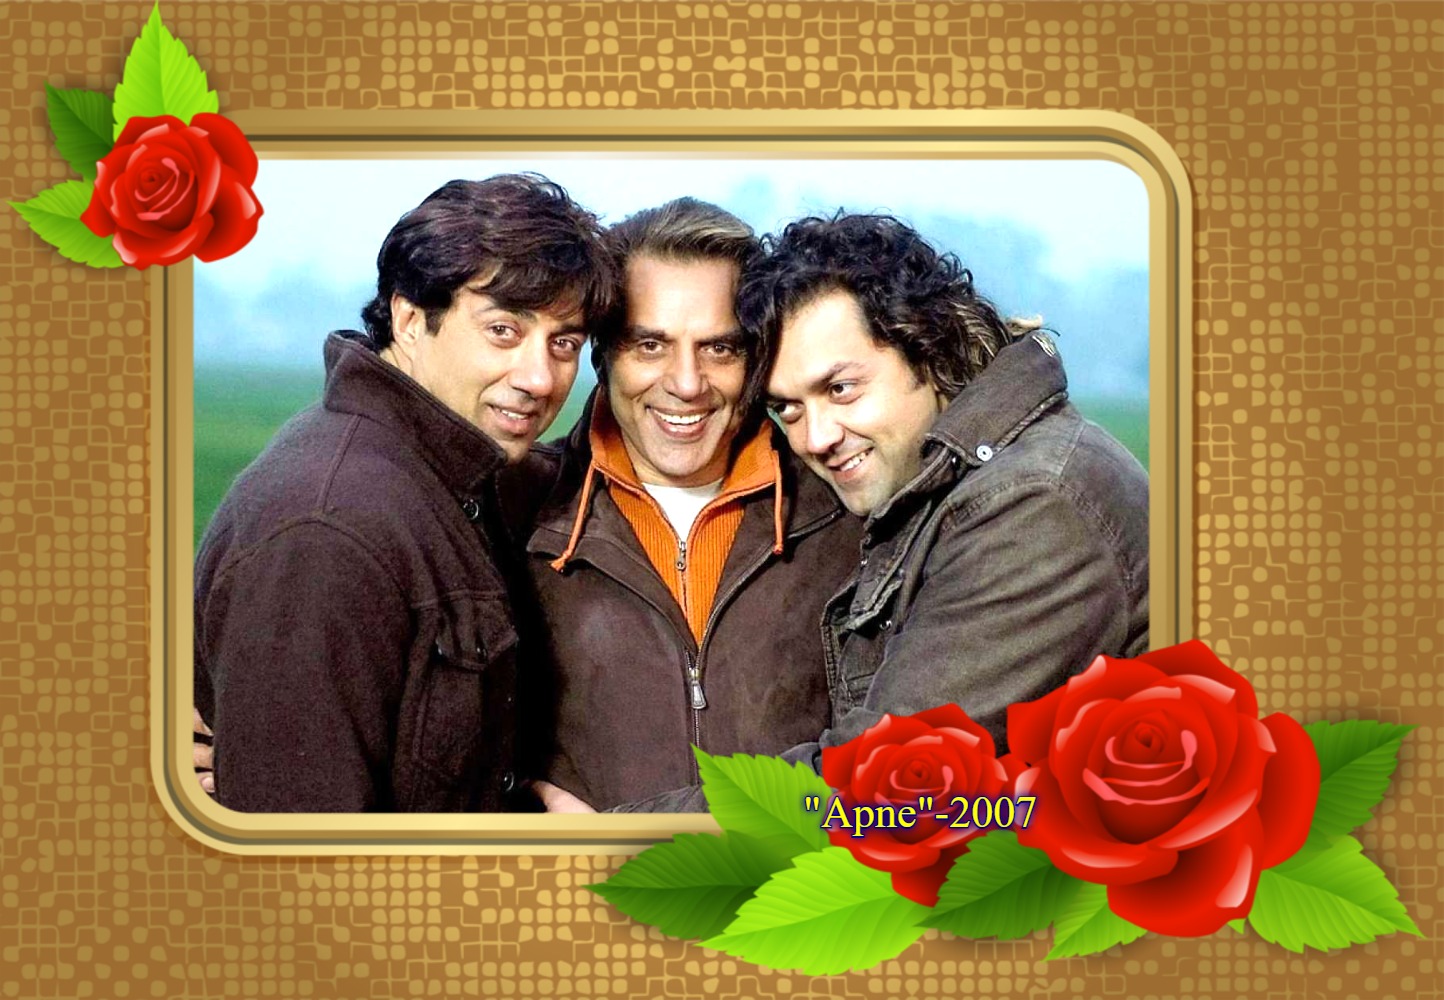 You are currently viewing “Bobby Deol Carved a Semi Romantic Image on Screen”